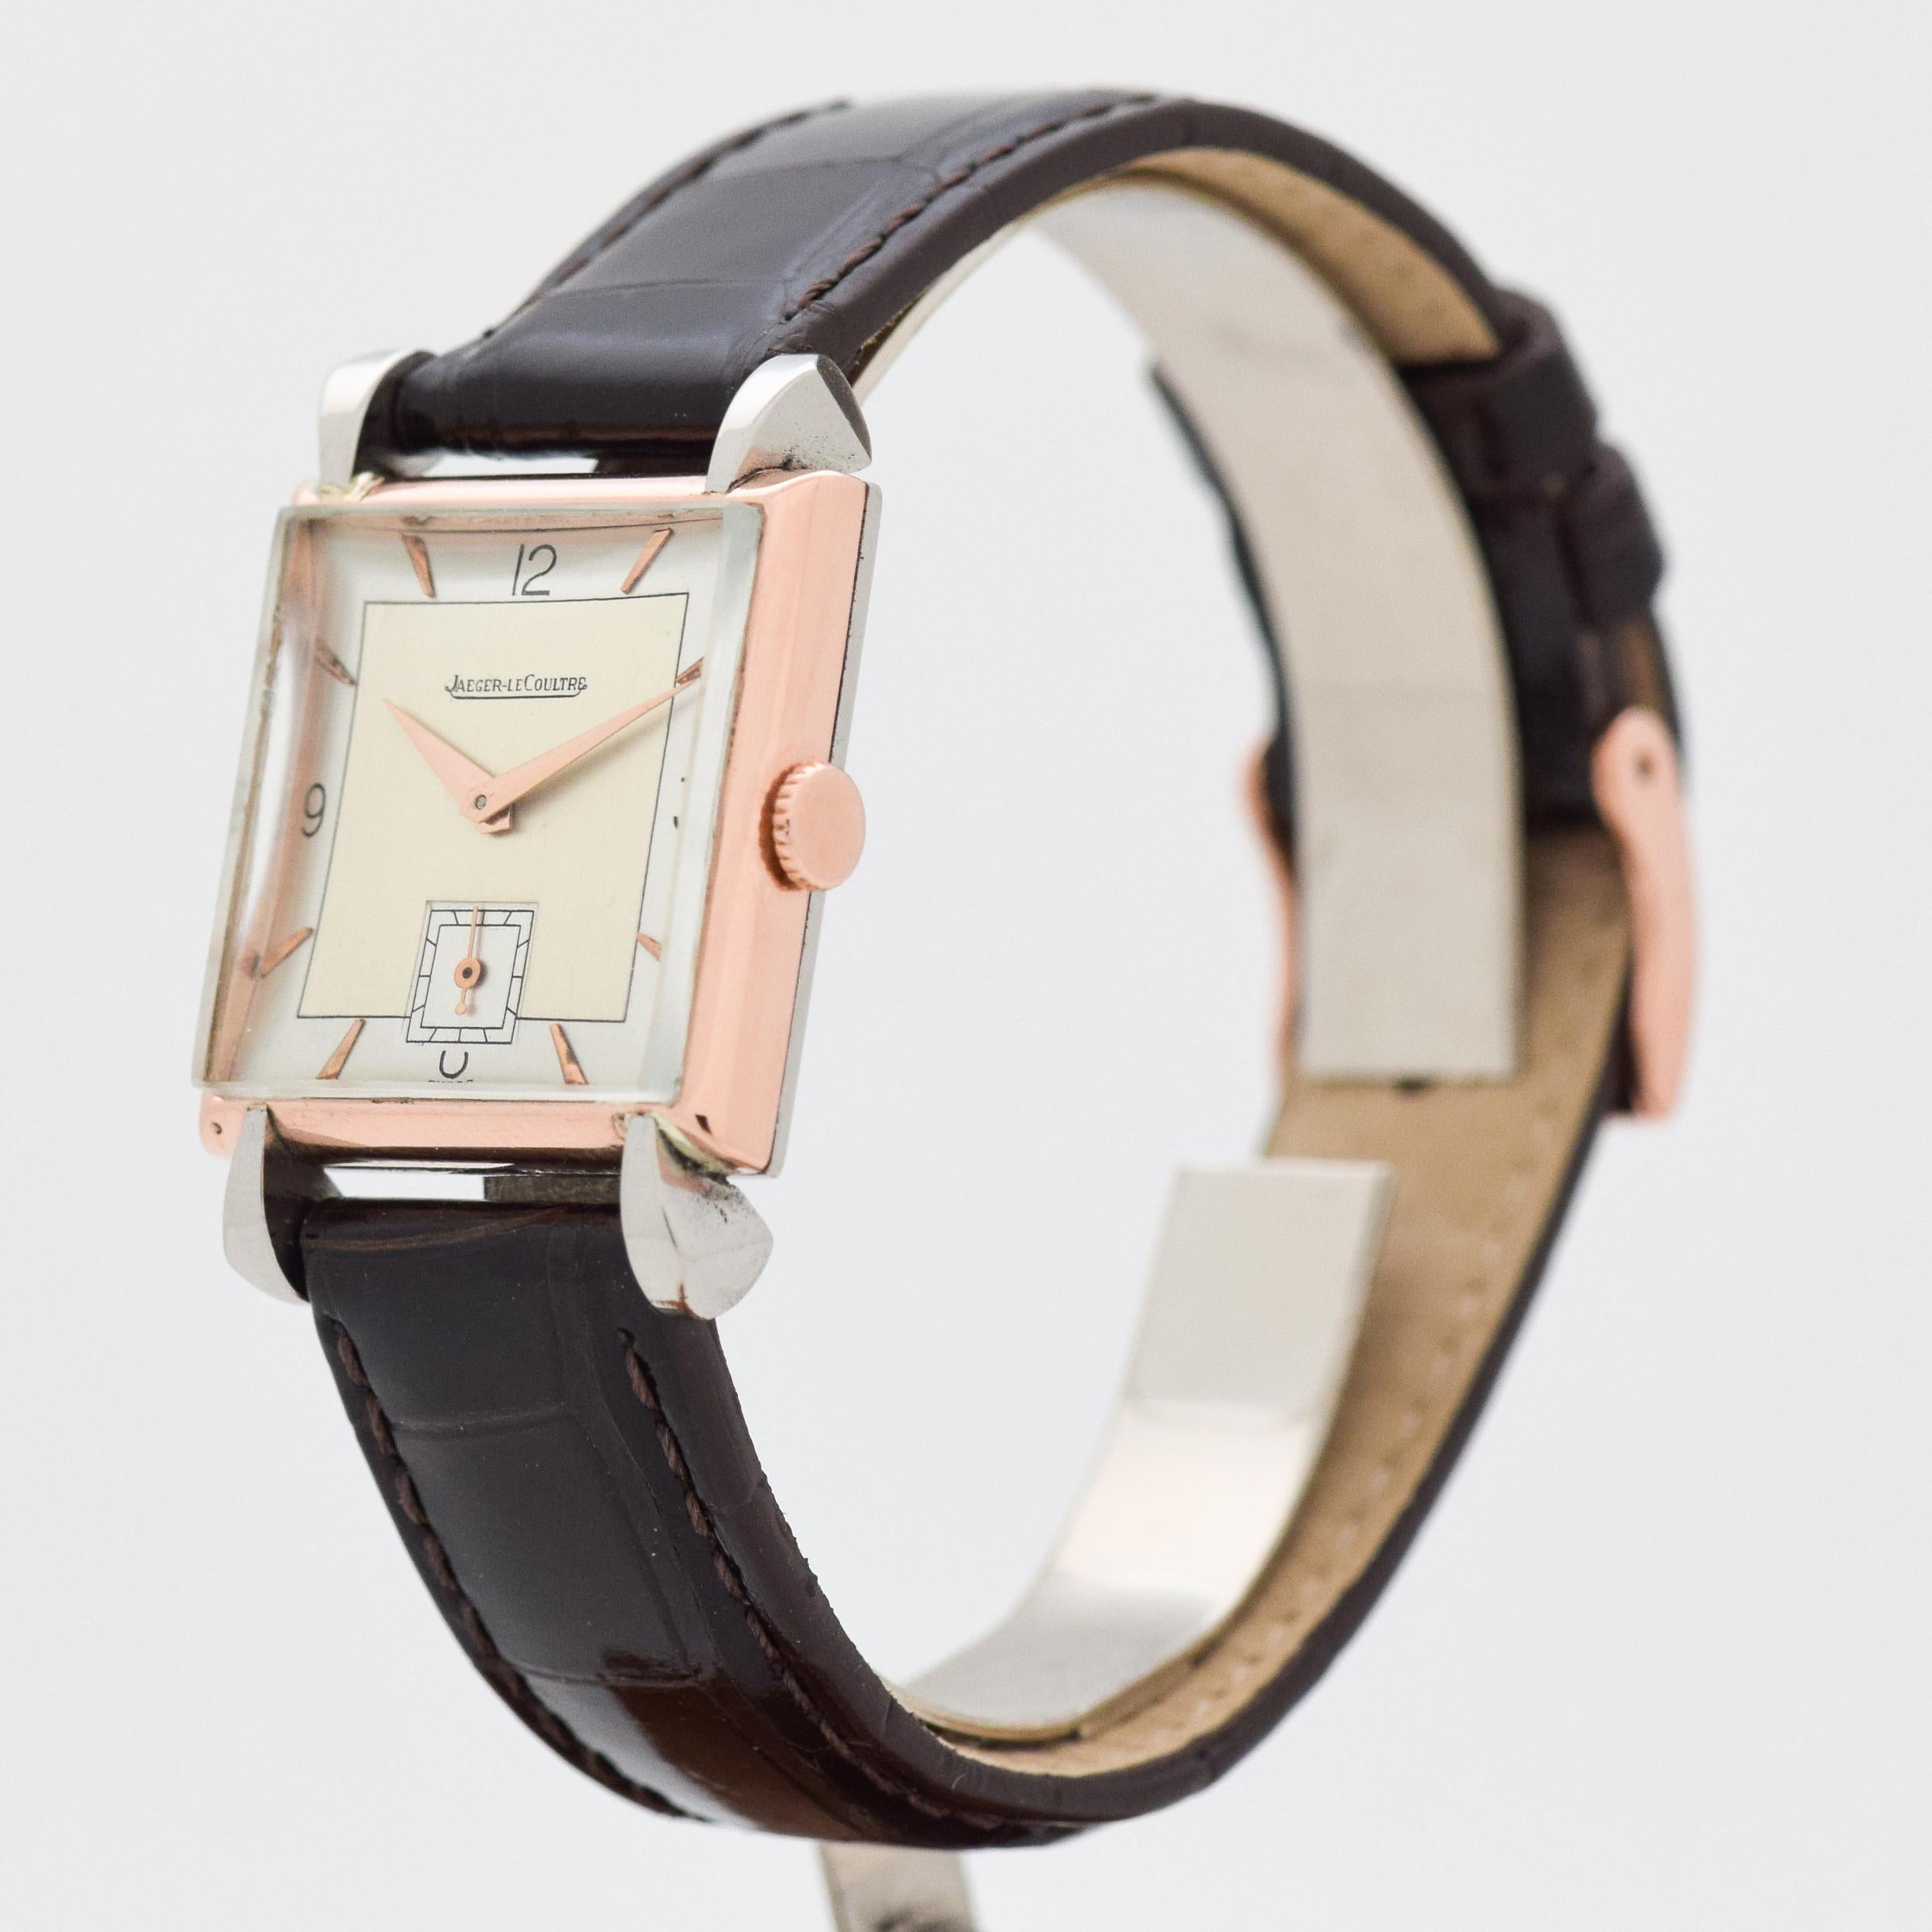 jaeger-lecoultre square watch